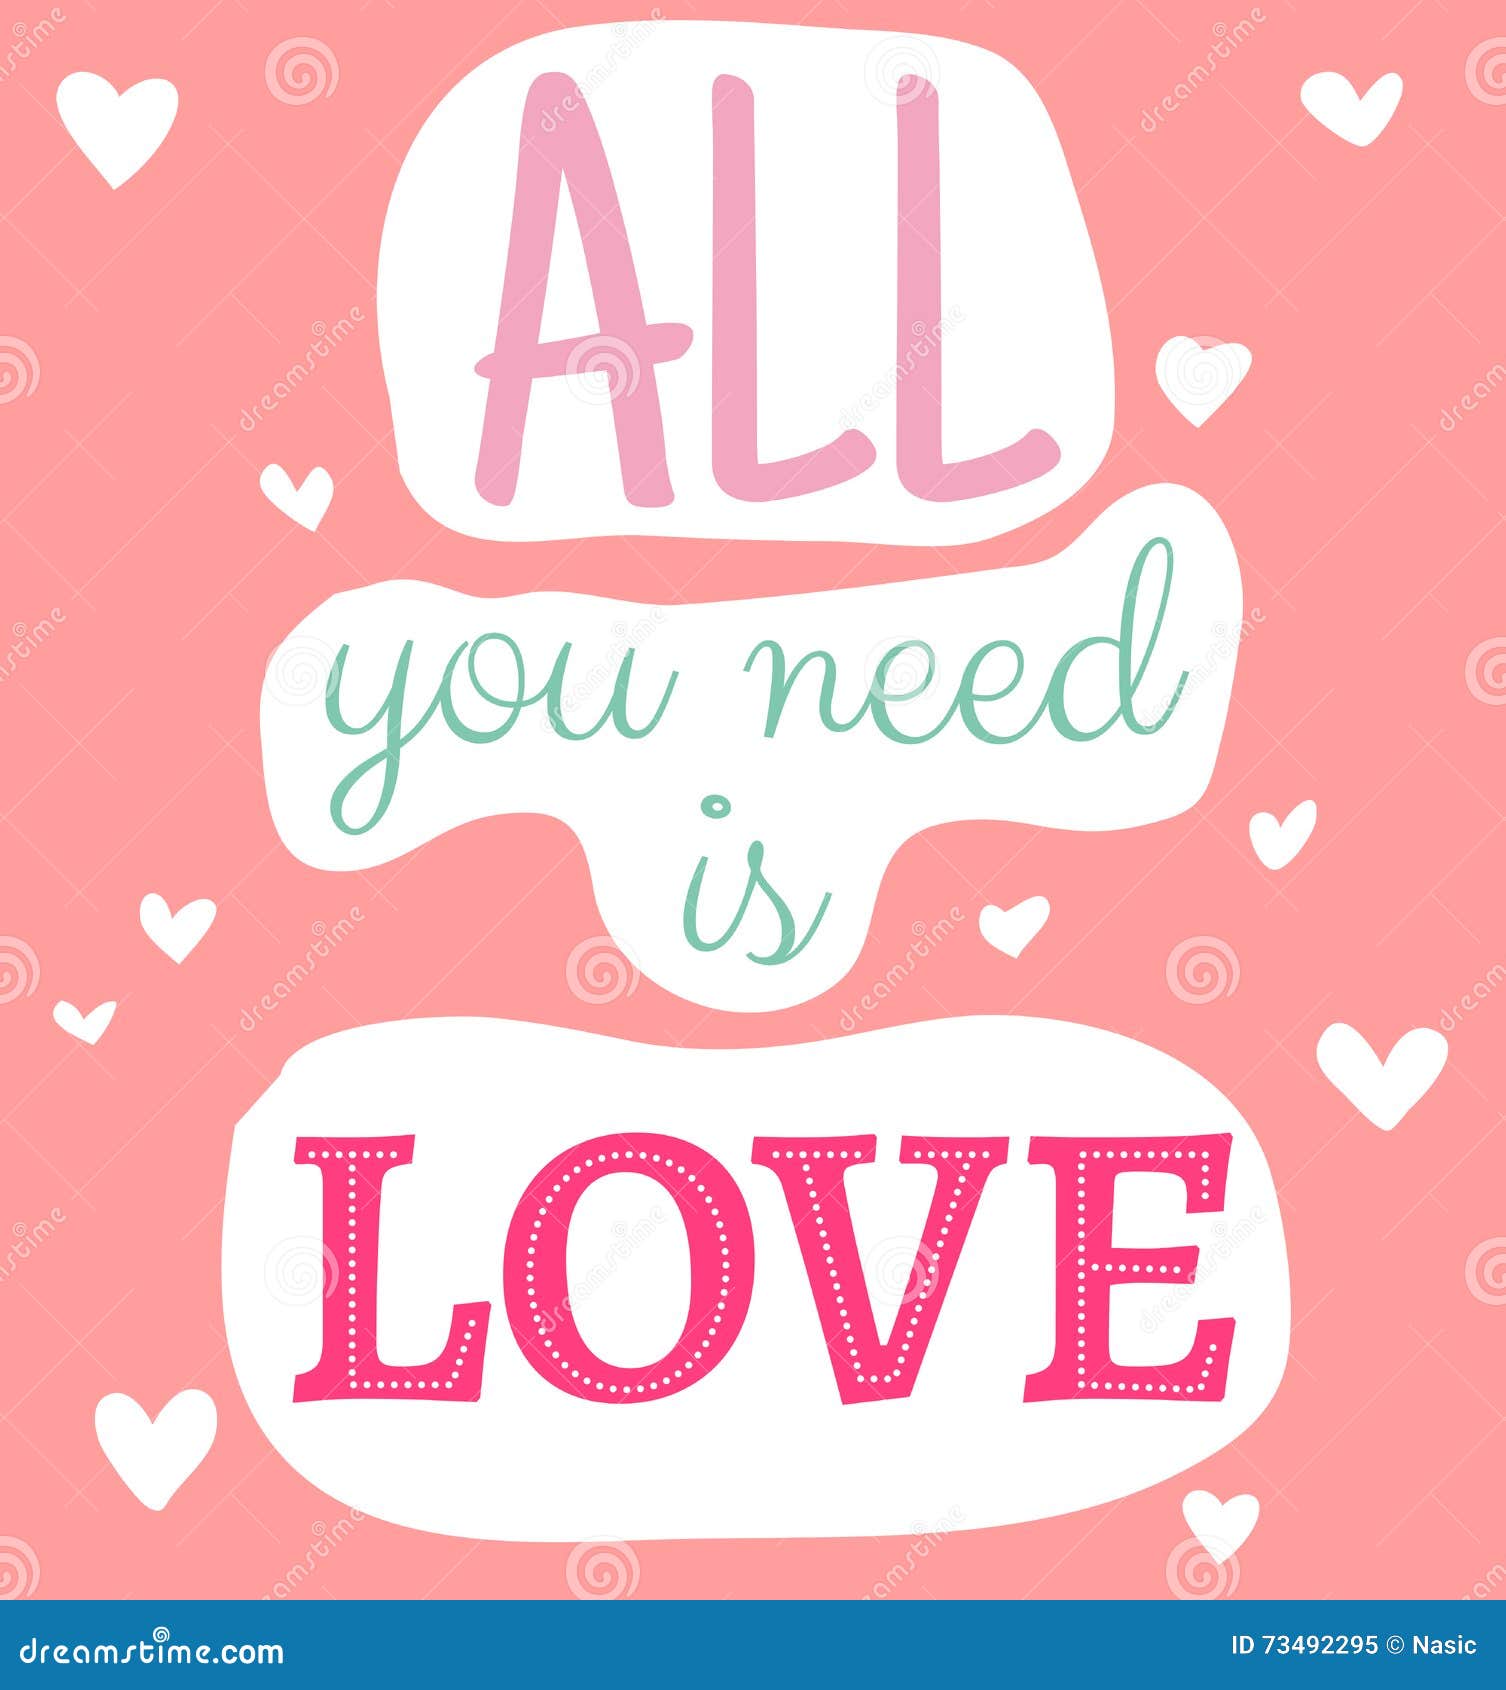 All you need is love quote stock vector. Illustration of love - 73492295